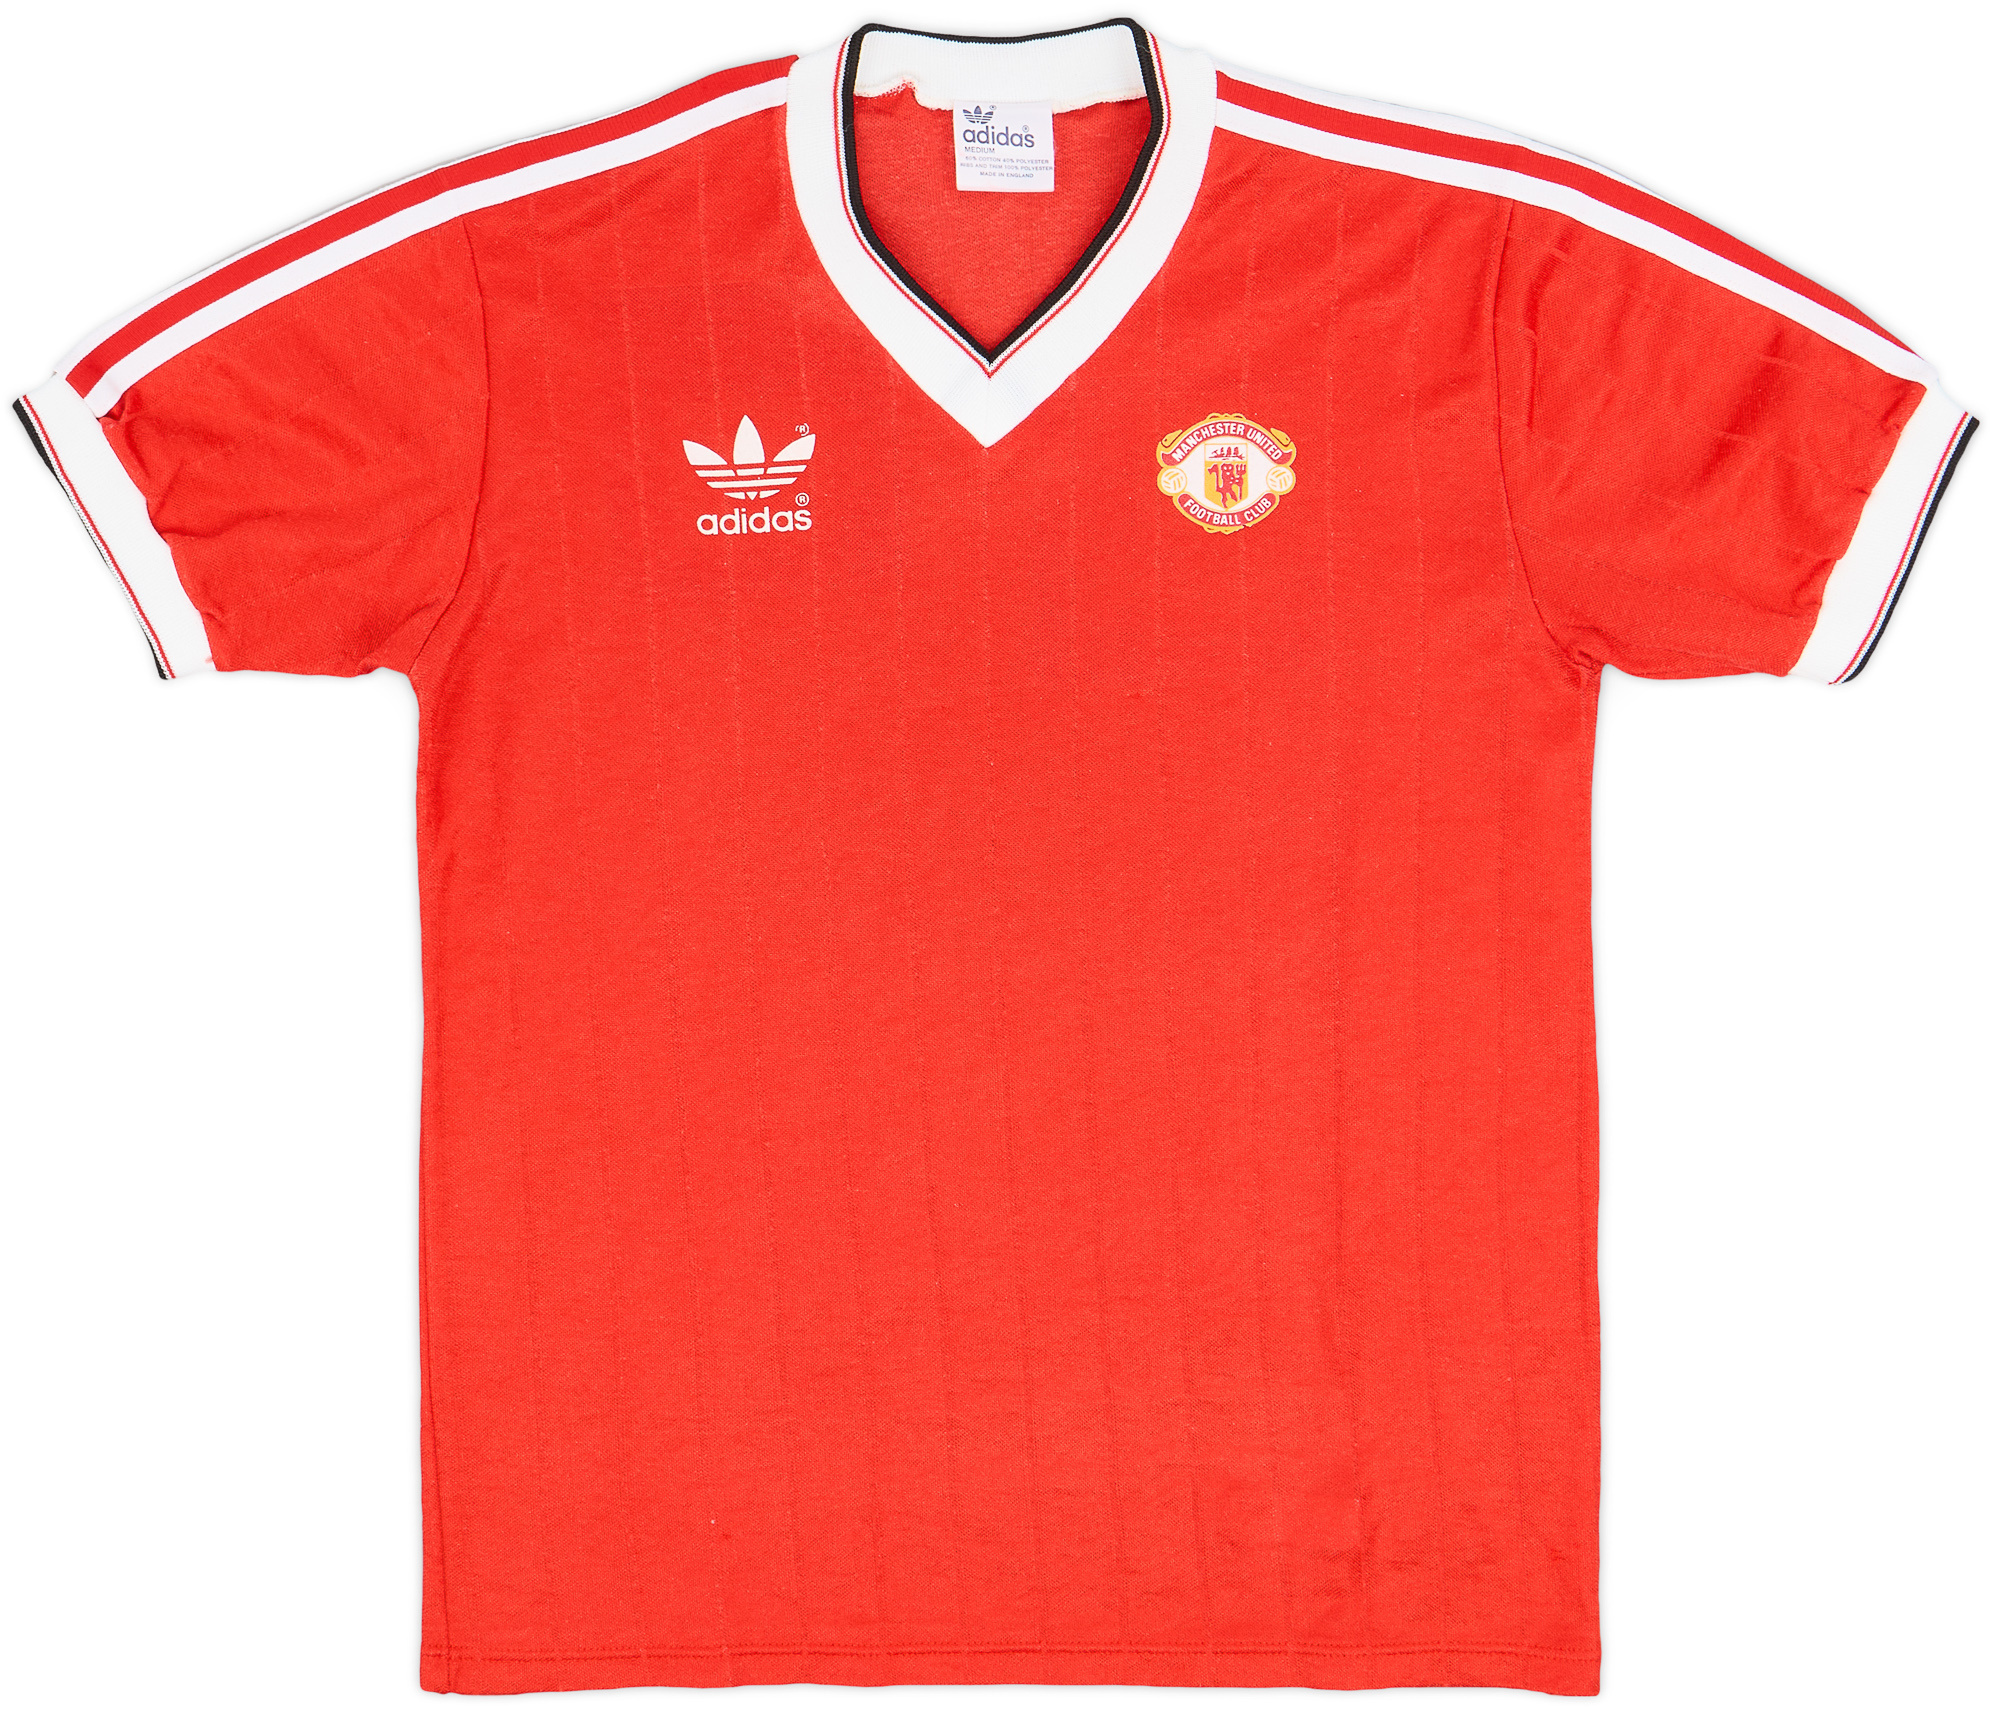 1982-84 Manchester United Home Shirt - 9/10 - ()